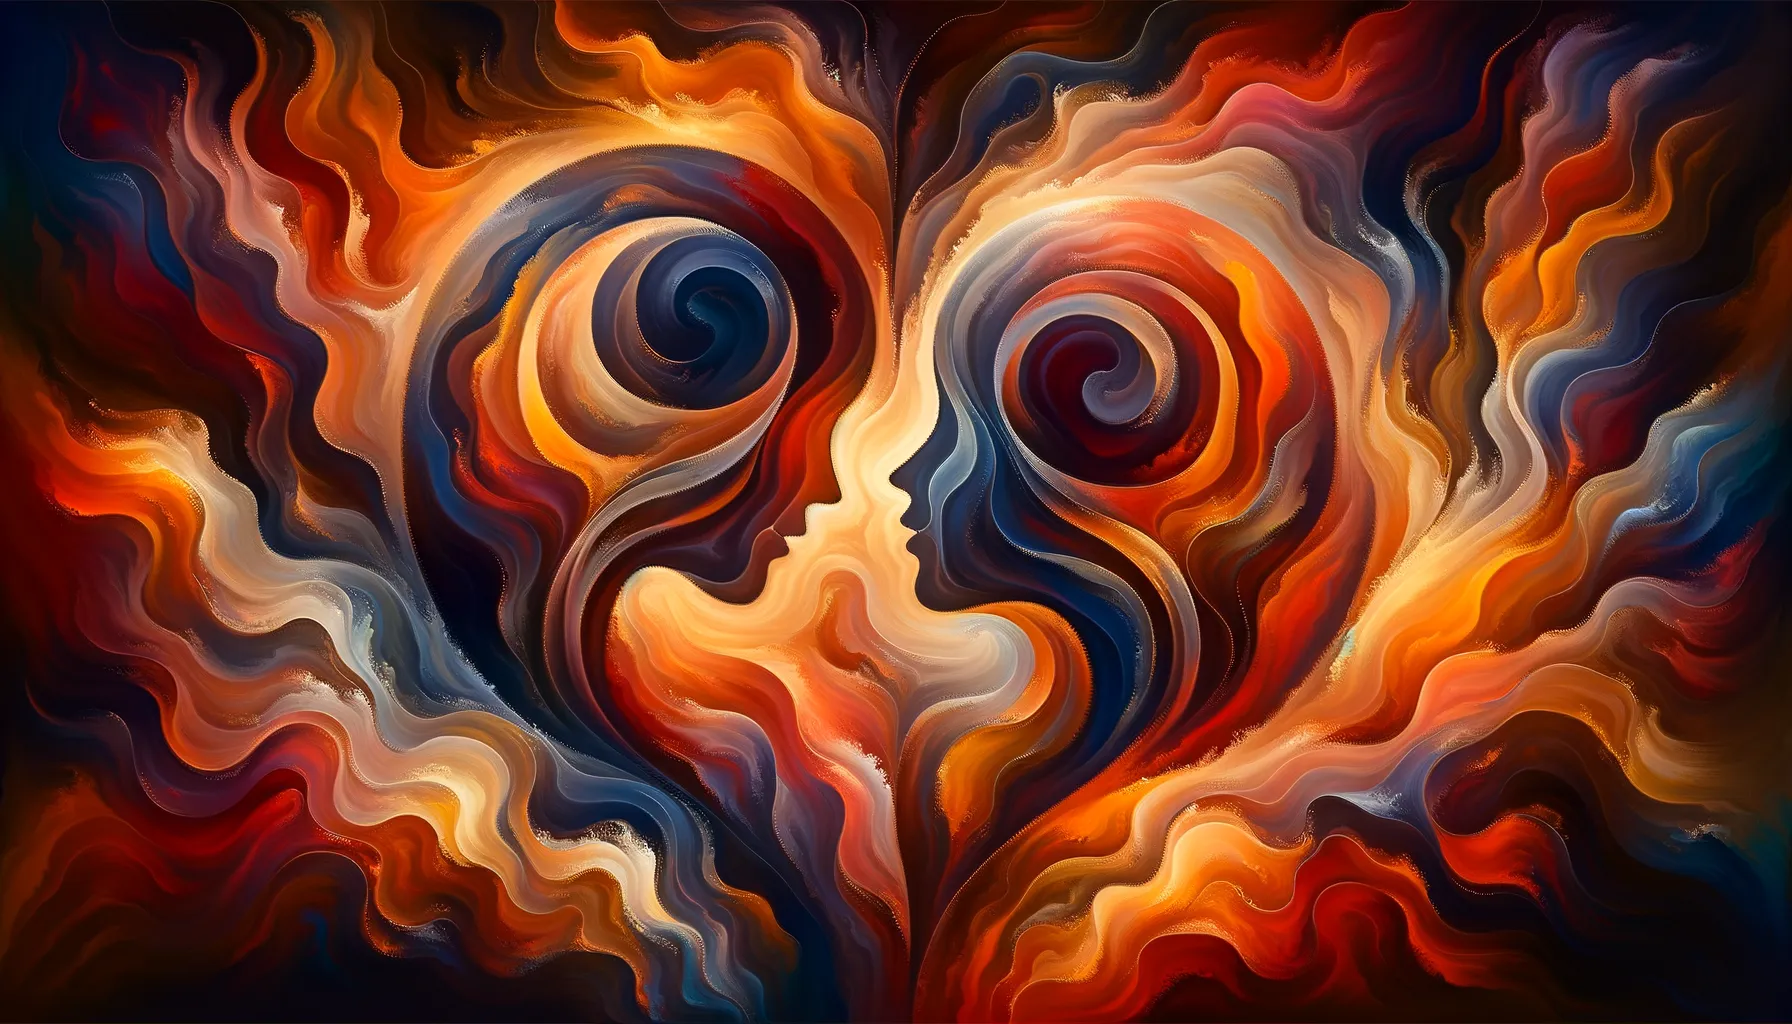 In the embrace of love, our souls intertwine with a rich complexity, crafting a unique symphony of emotions that resonates with the warmth of shared experiences and mutual growth.